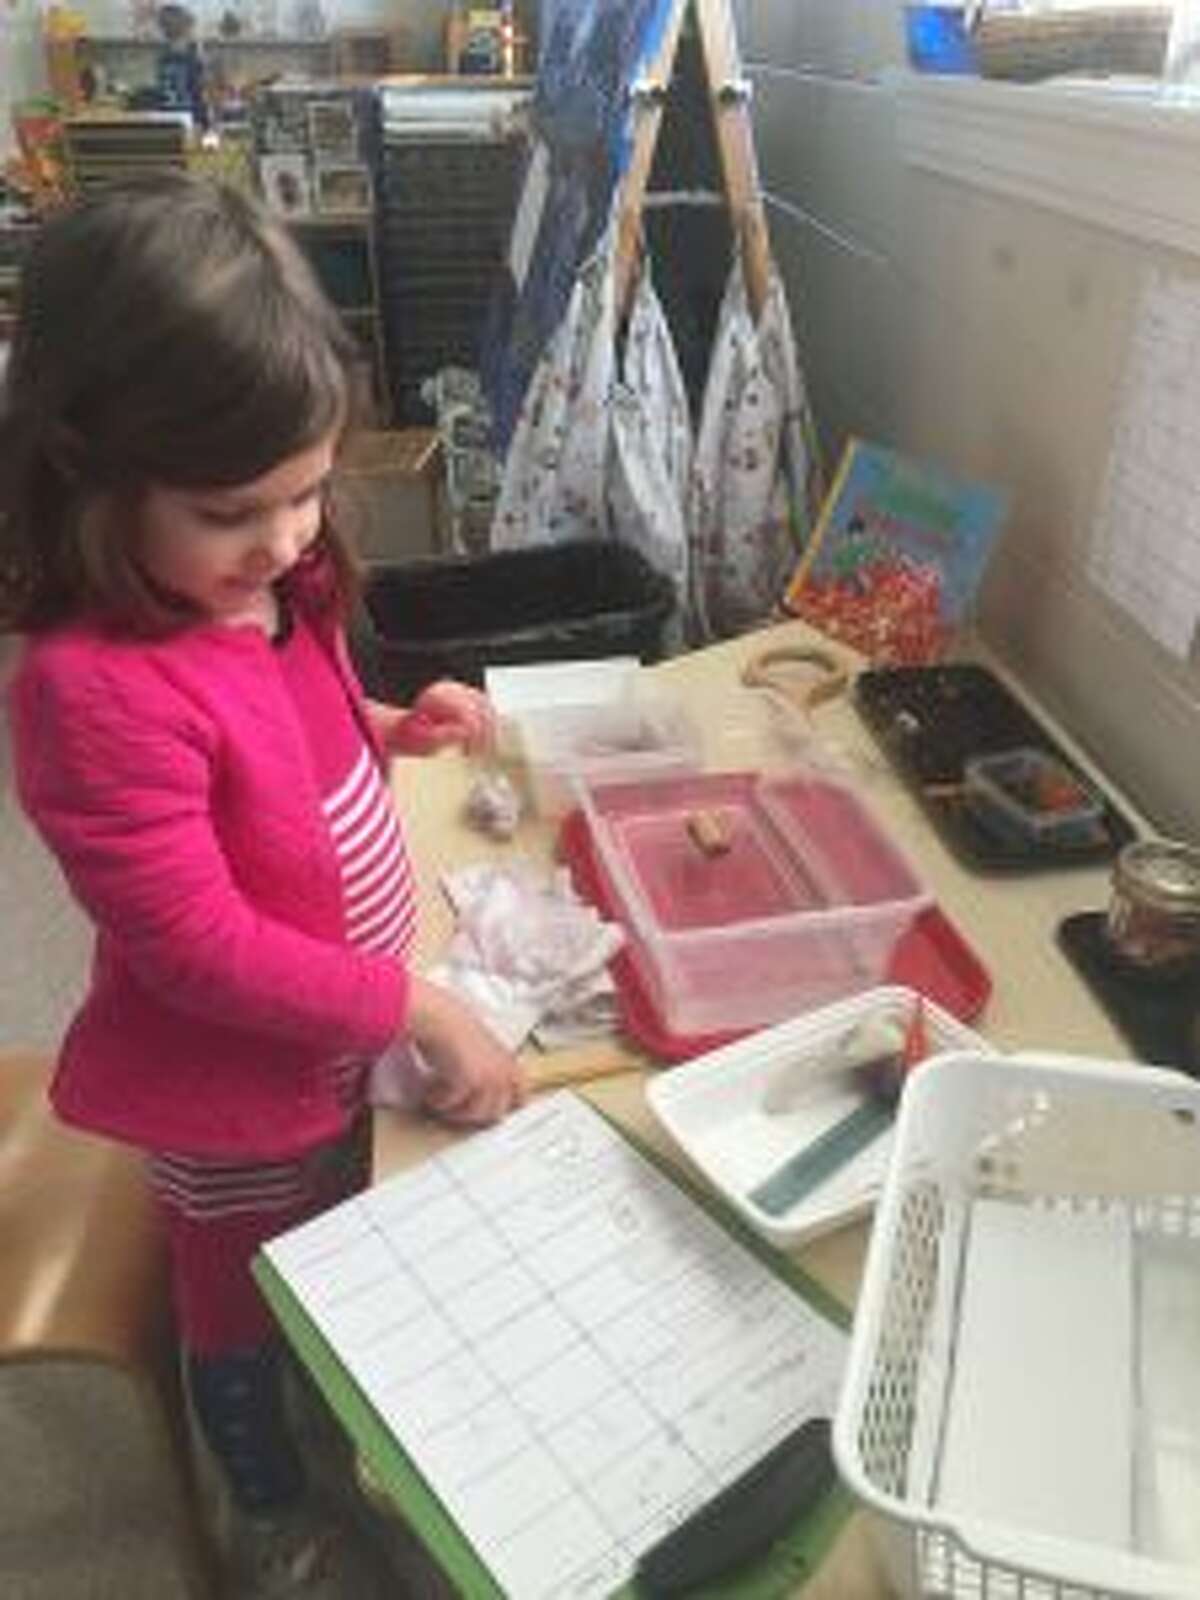 New Canaan: A preschooler plays with STEAM.